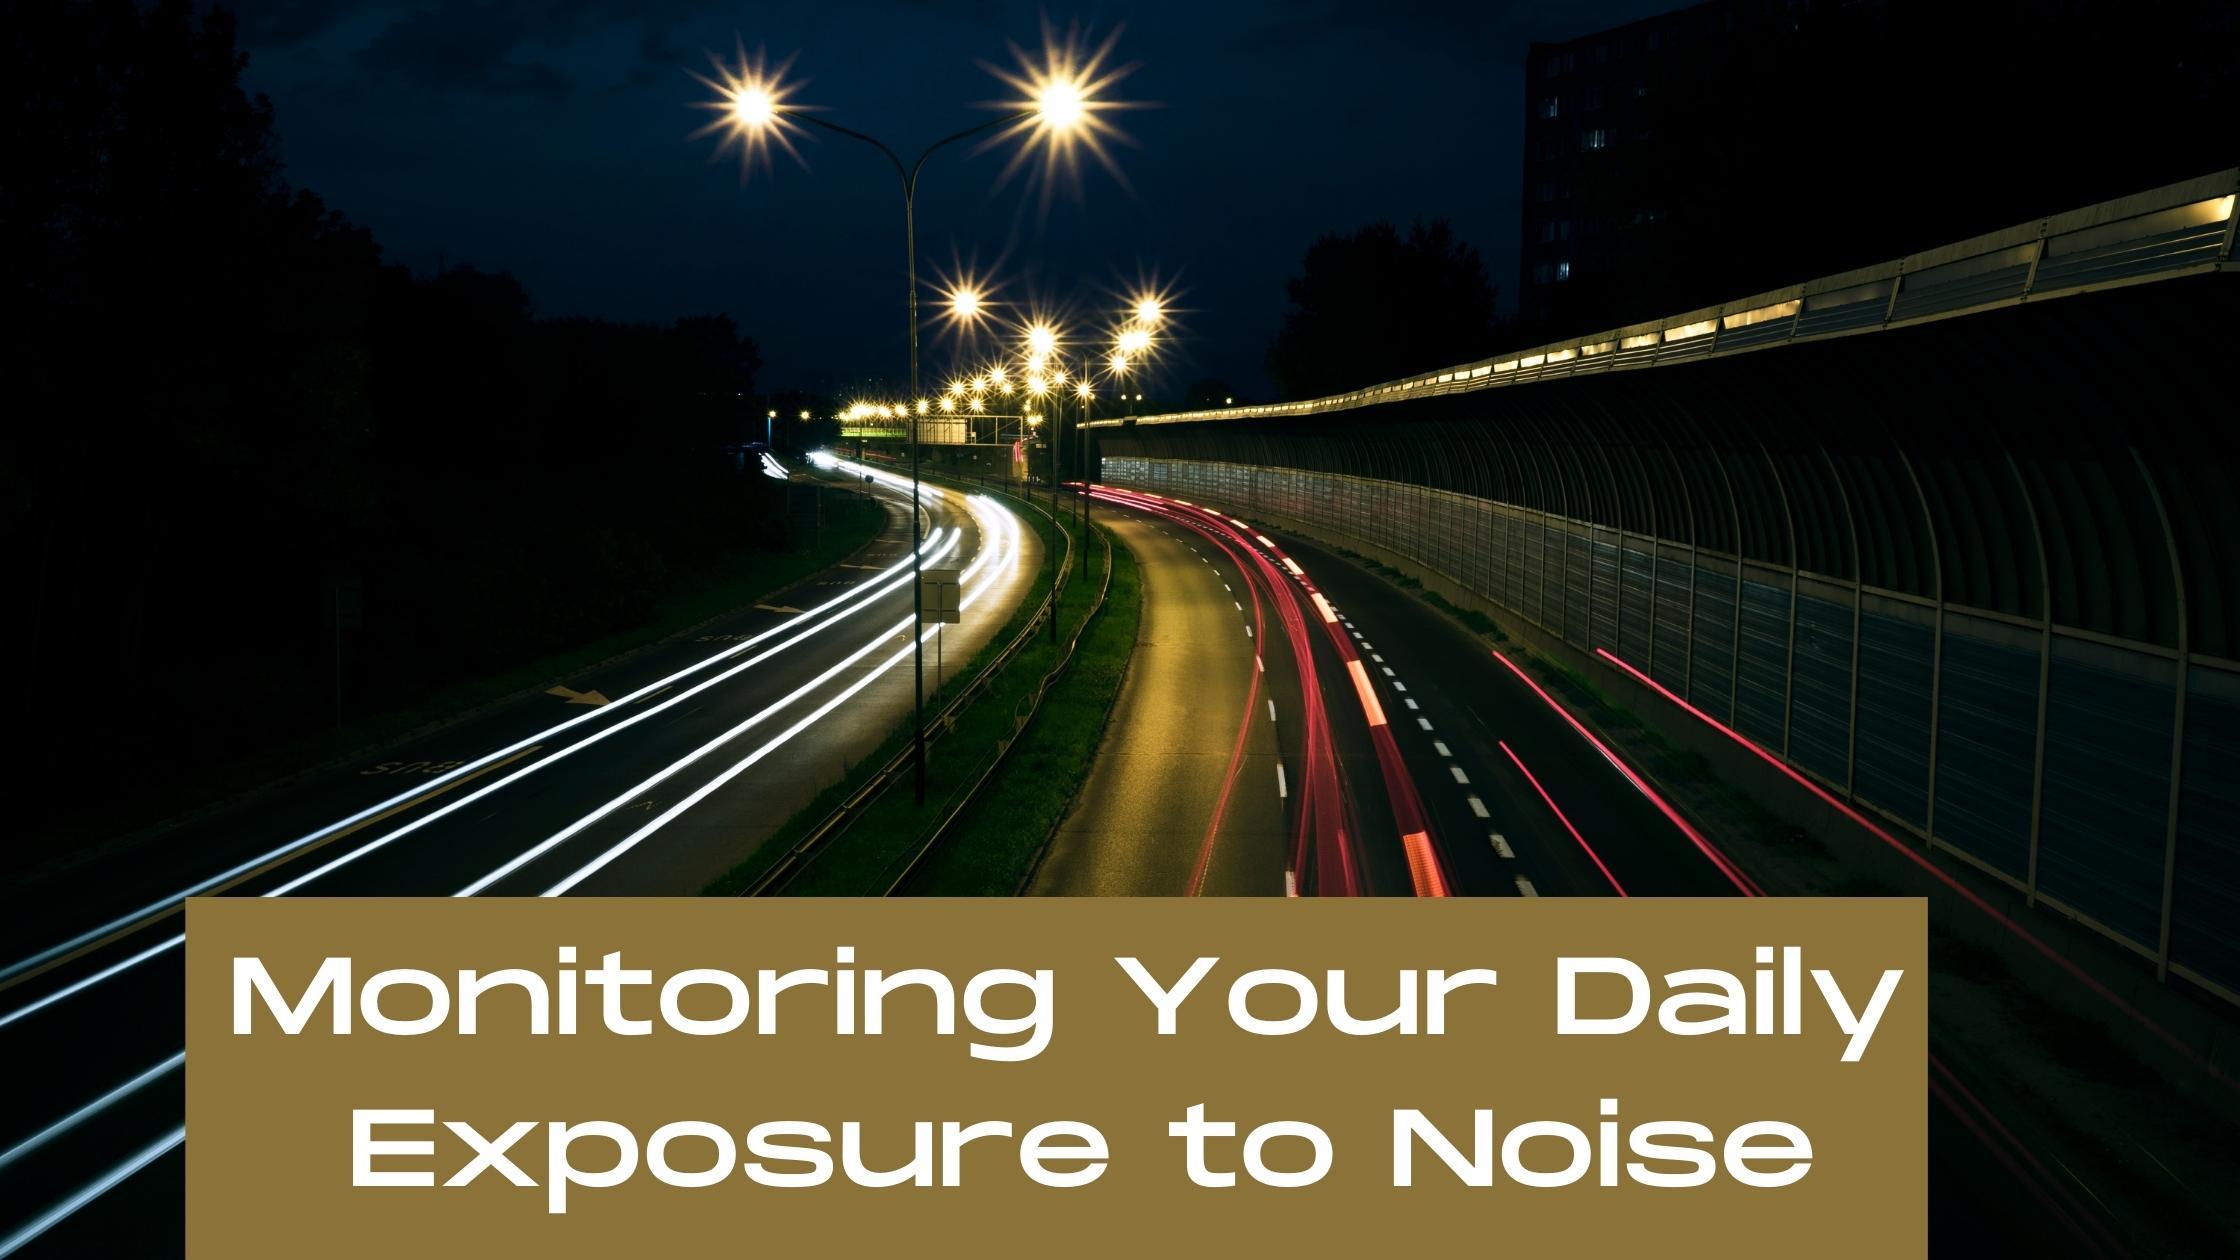 Featured image for “Monitoring Your Daily Exposure to Noise”